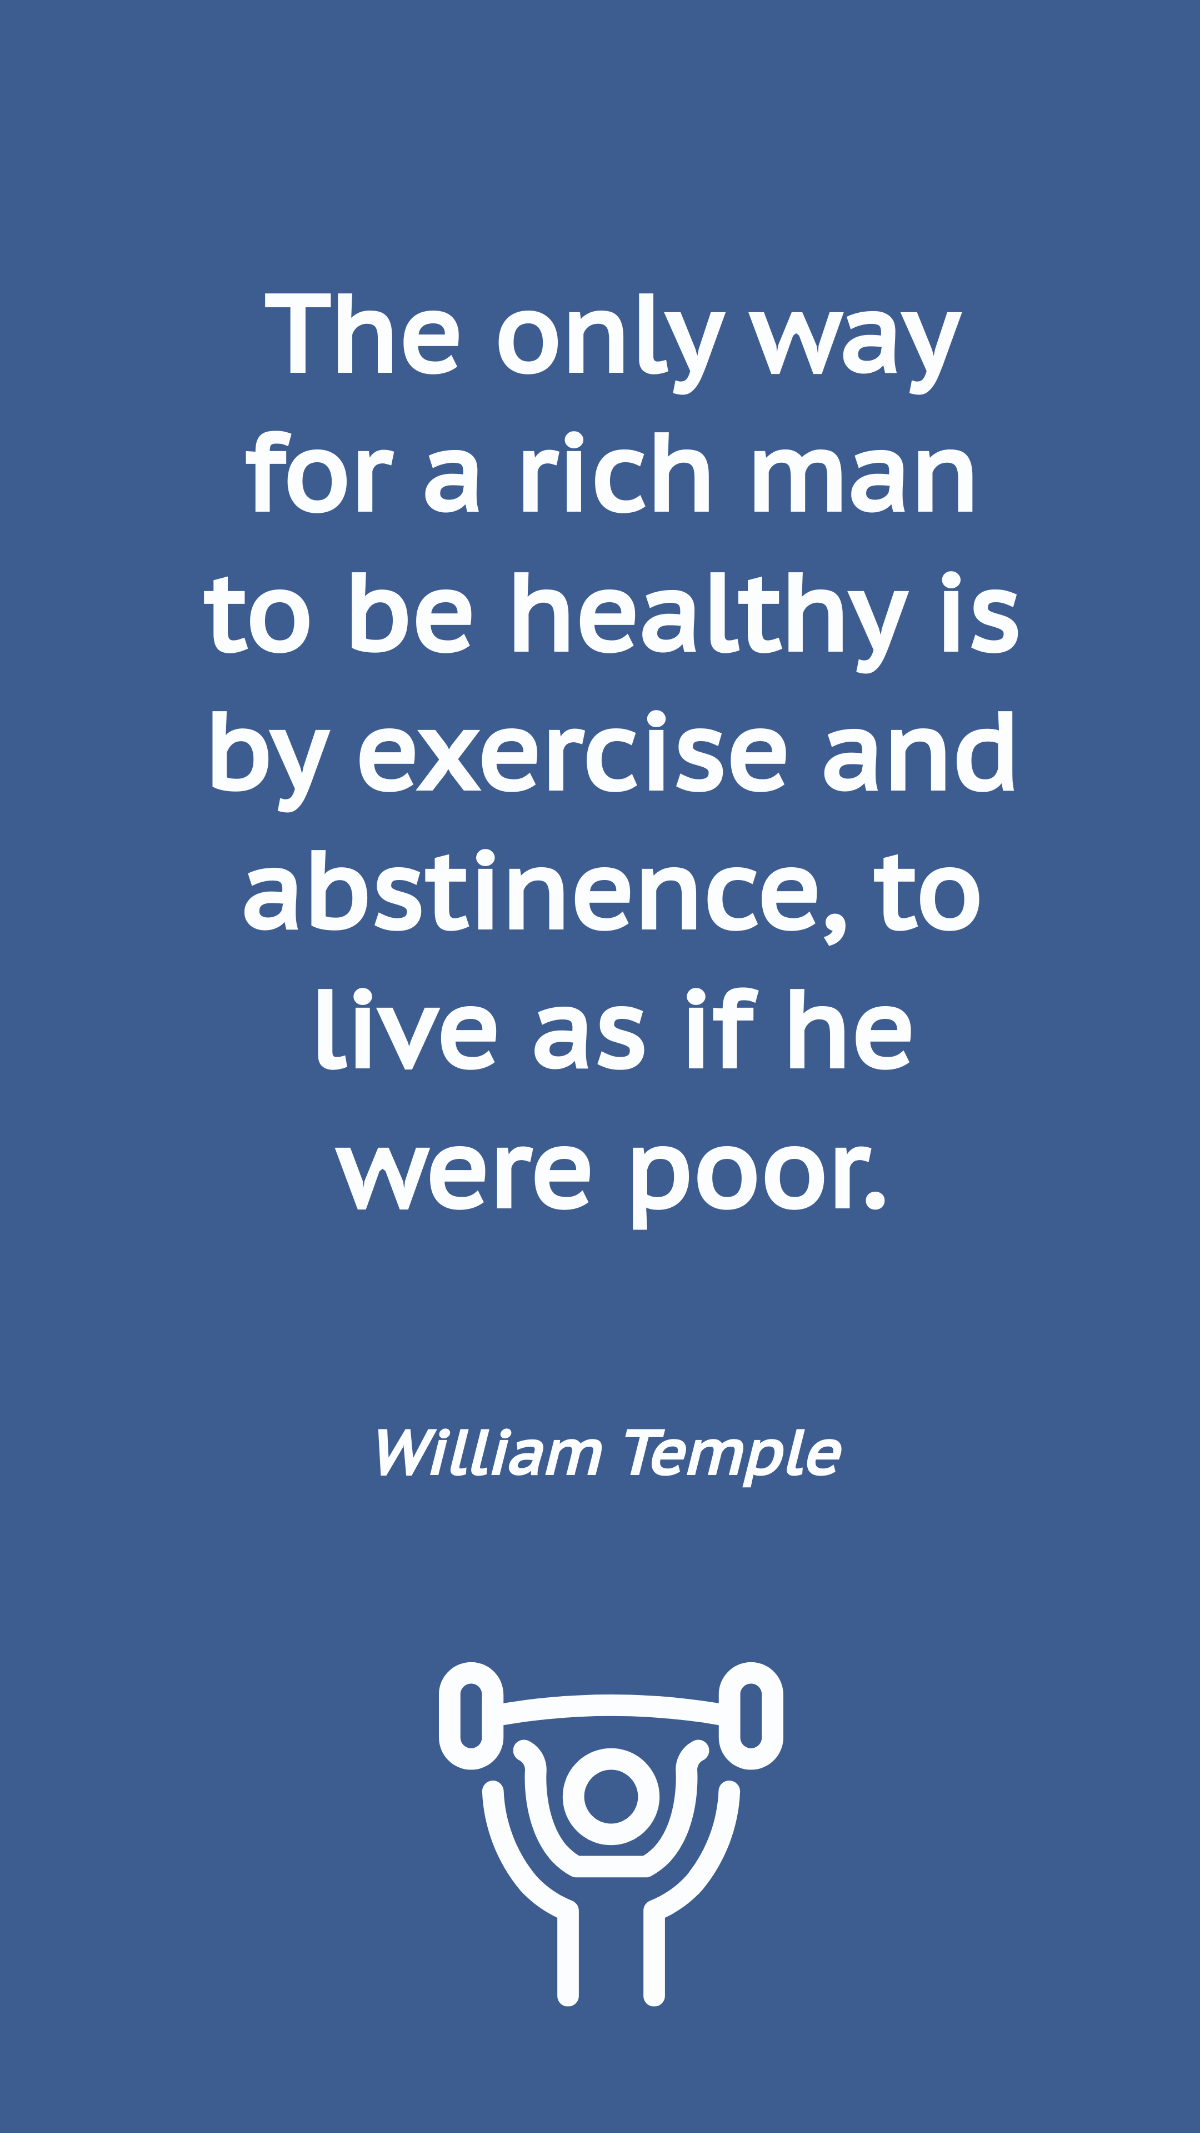 William Temple - The only way for a rich man to be healthy is by exercise and abstinence, to live as if he were poor. Template